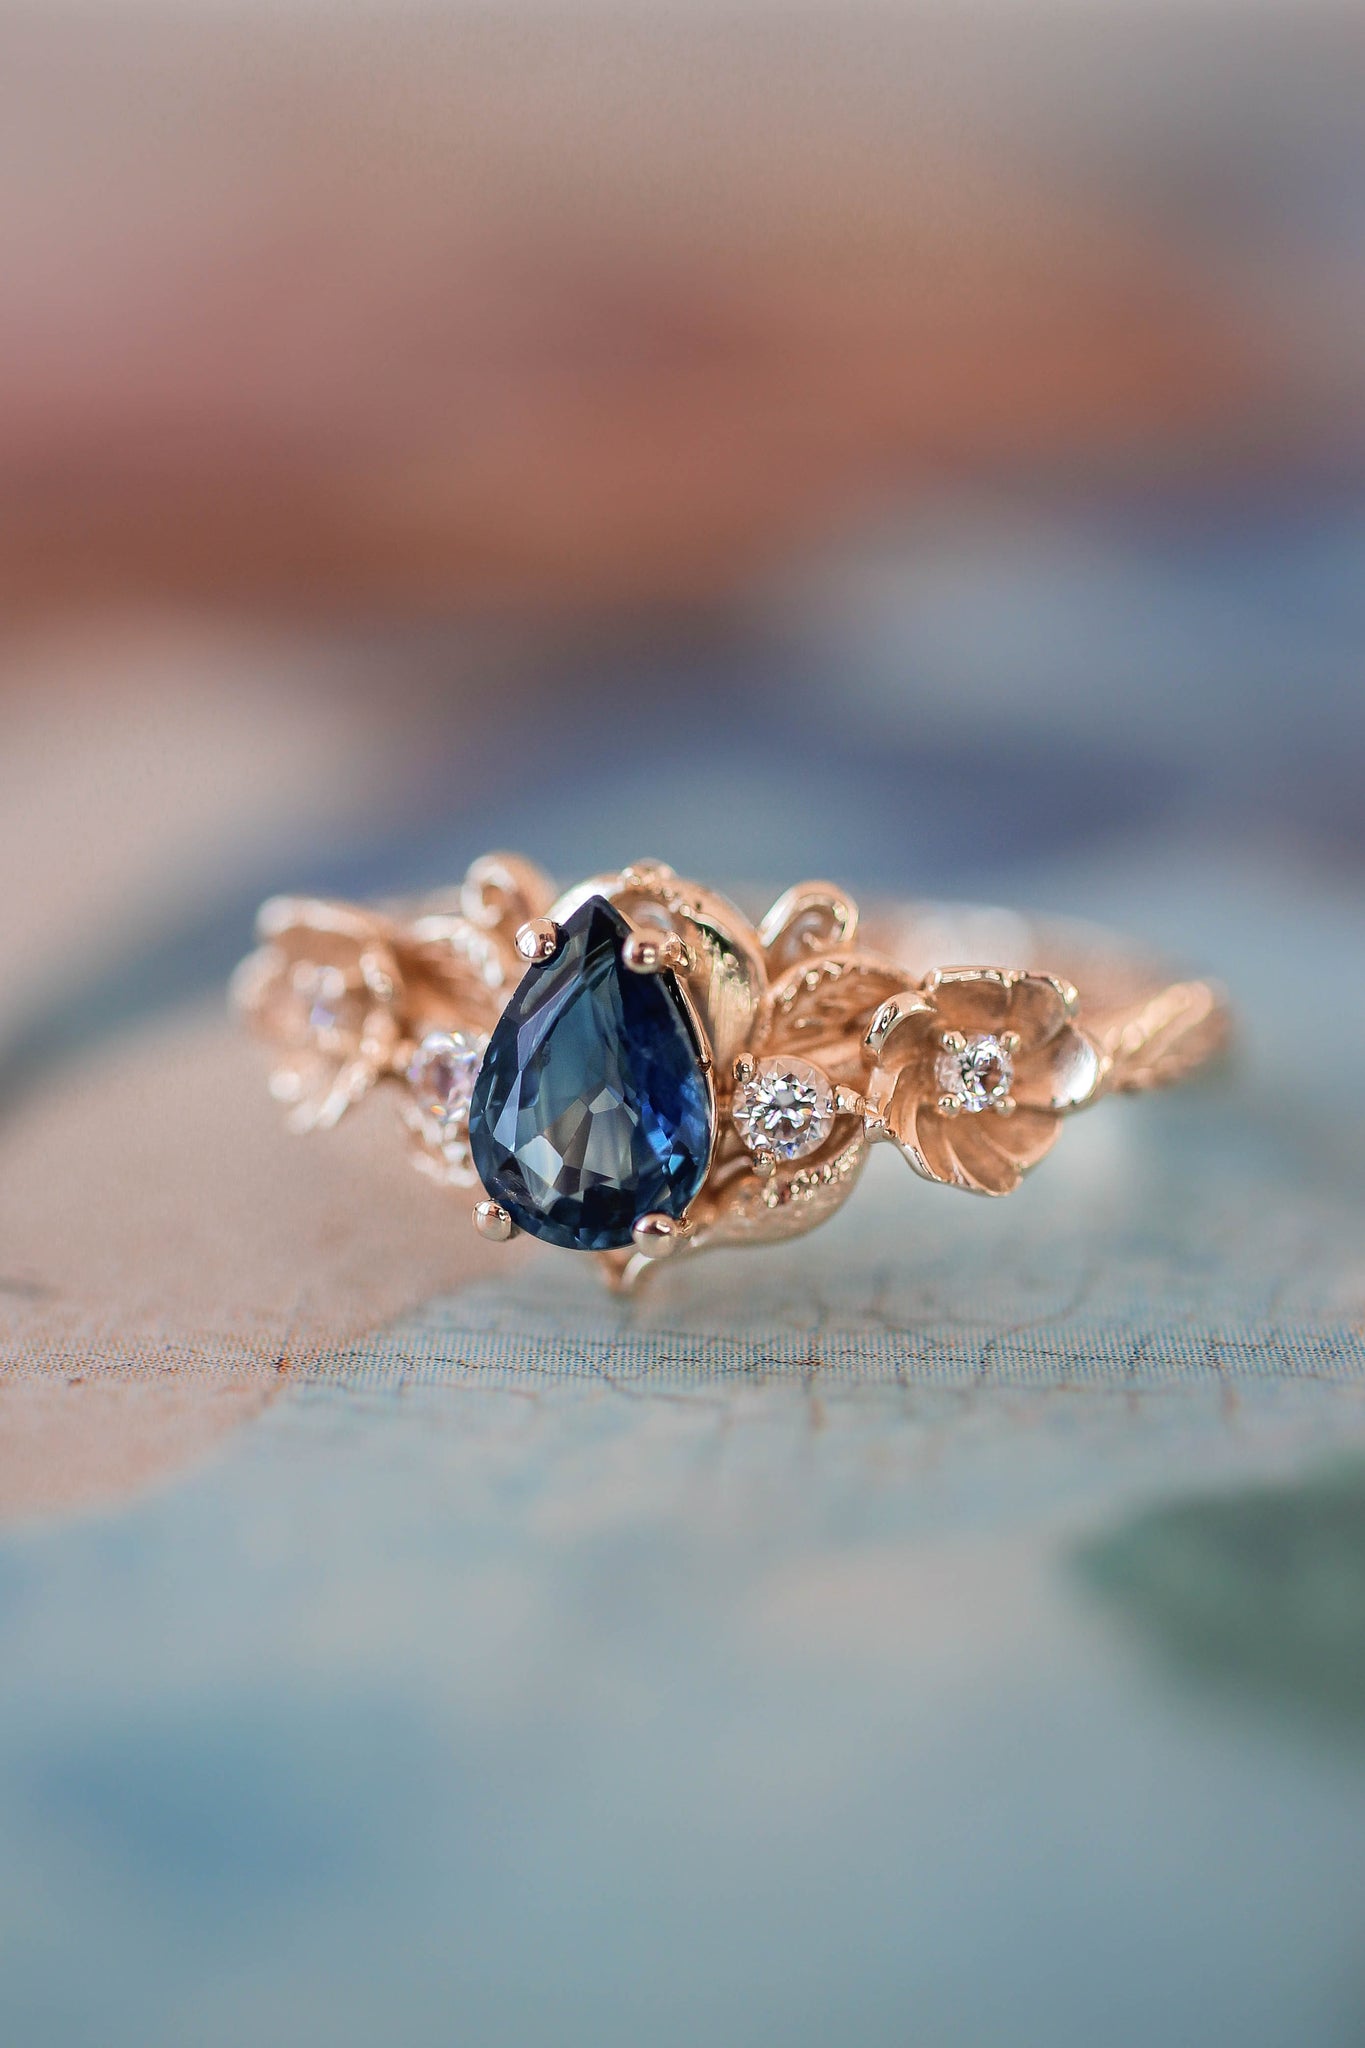 Sapphire and diamonds ring, flower engagement ring / Adelina - Eden Garden Jewelry™